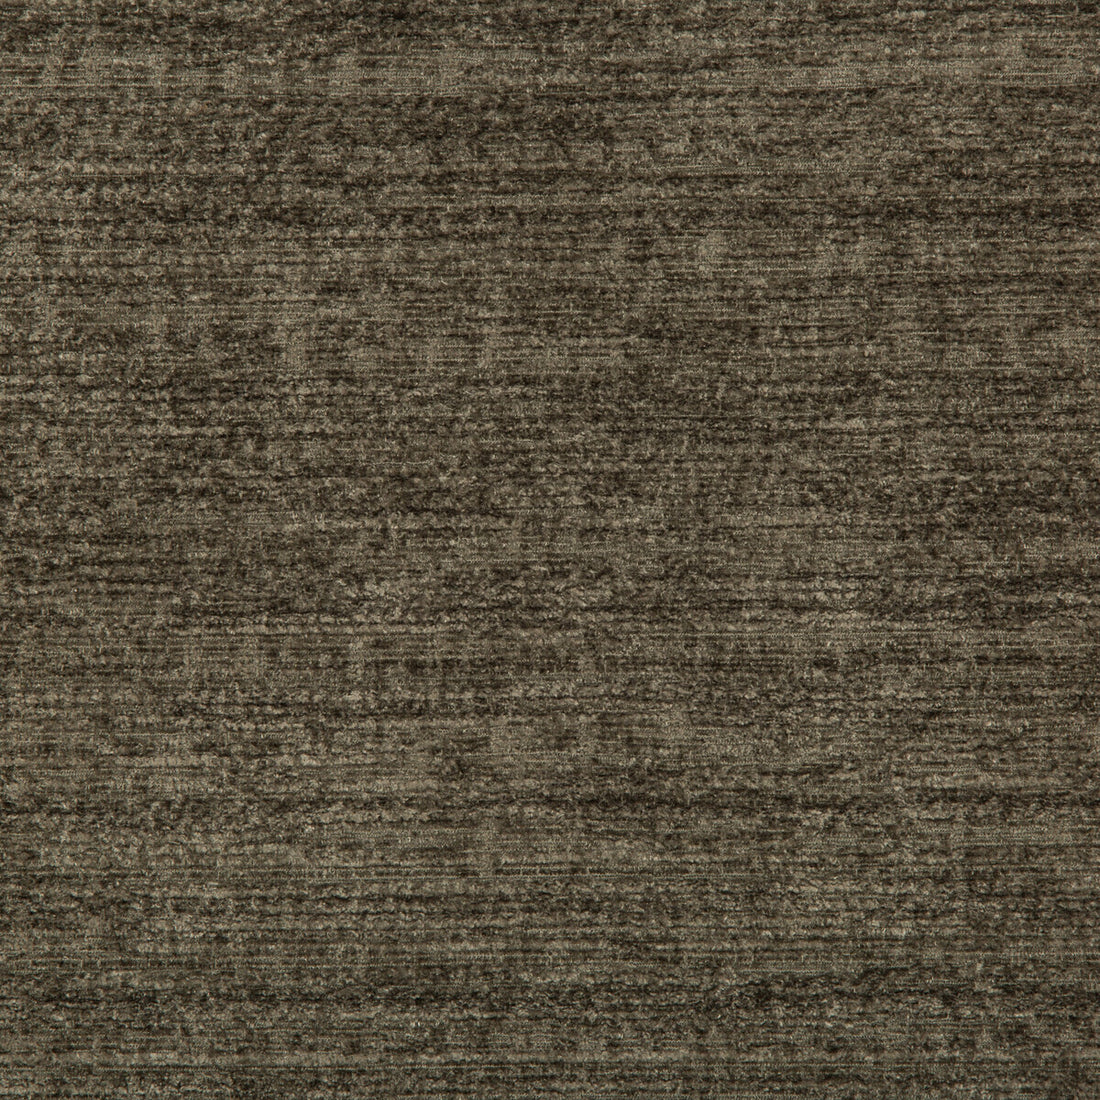 Kravet Smart fabric in 35779-1121 color - pattern 35779.1121.0 - by Kravet Smart in the Performance collection